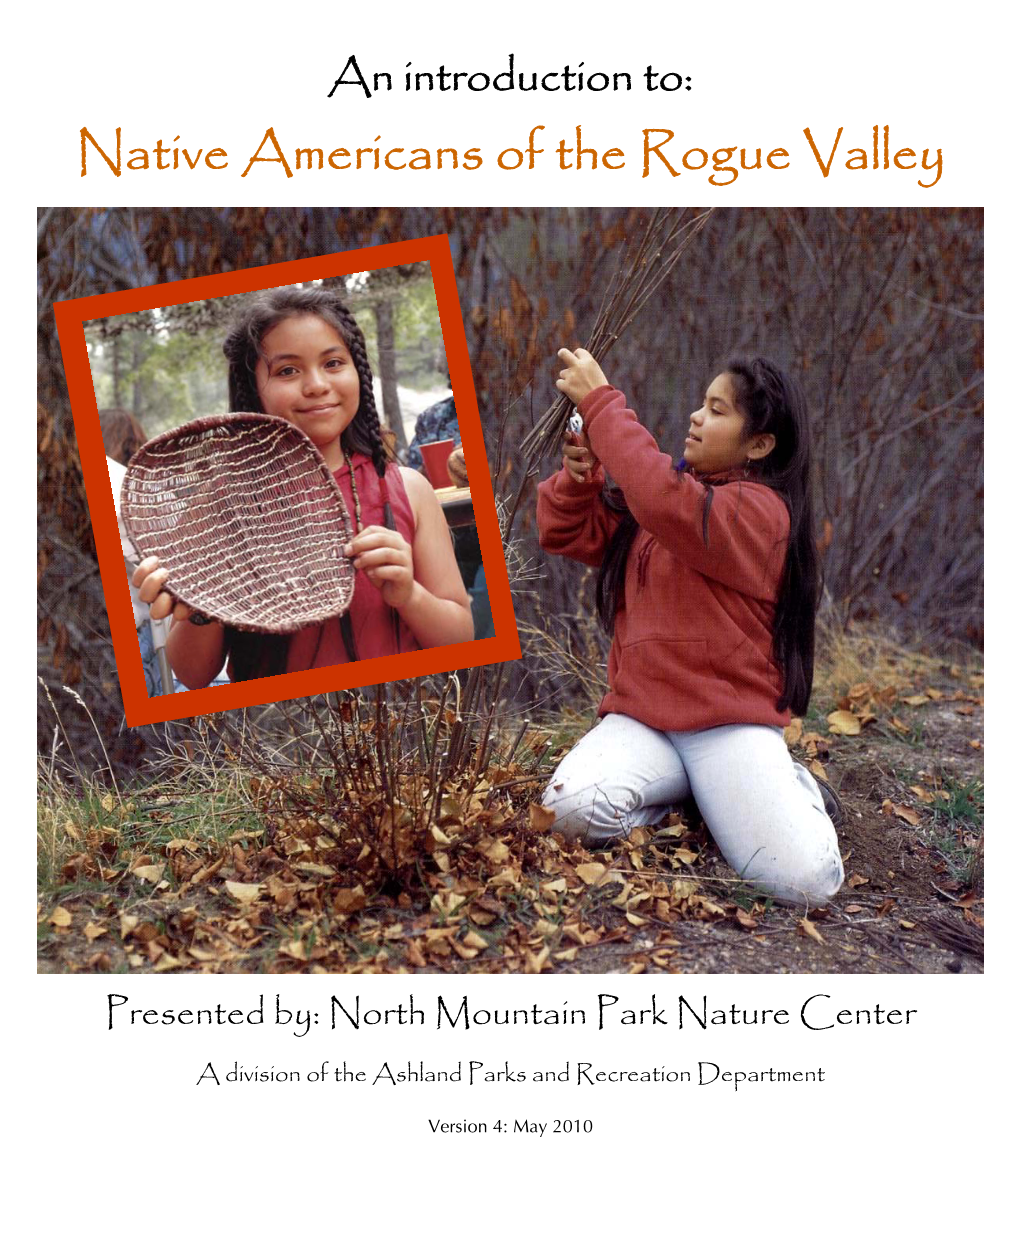 Native Americans of the Rogue Valley